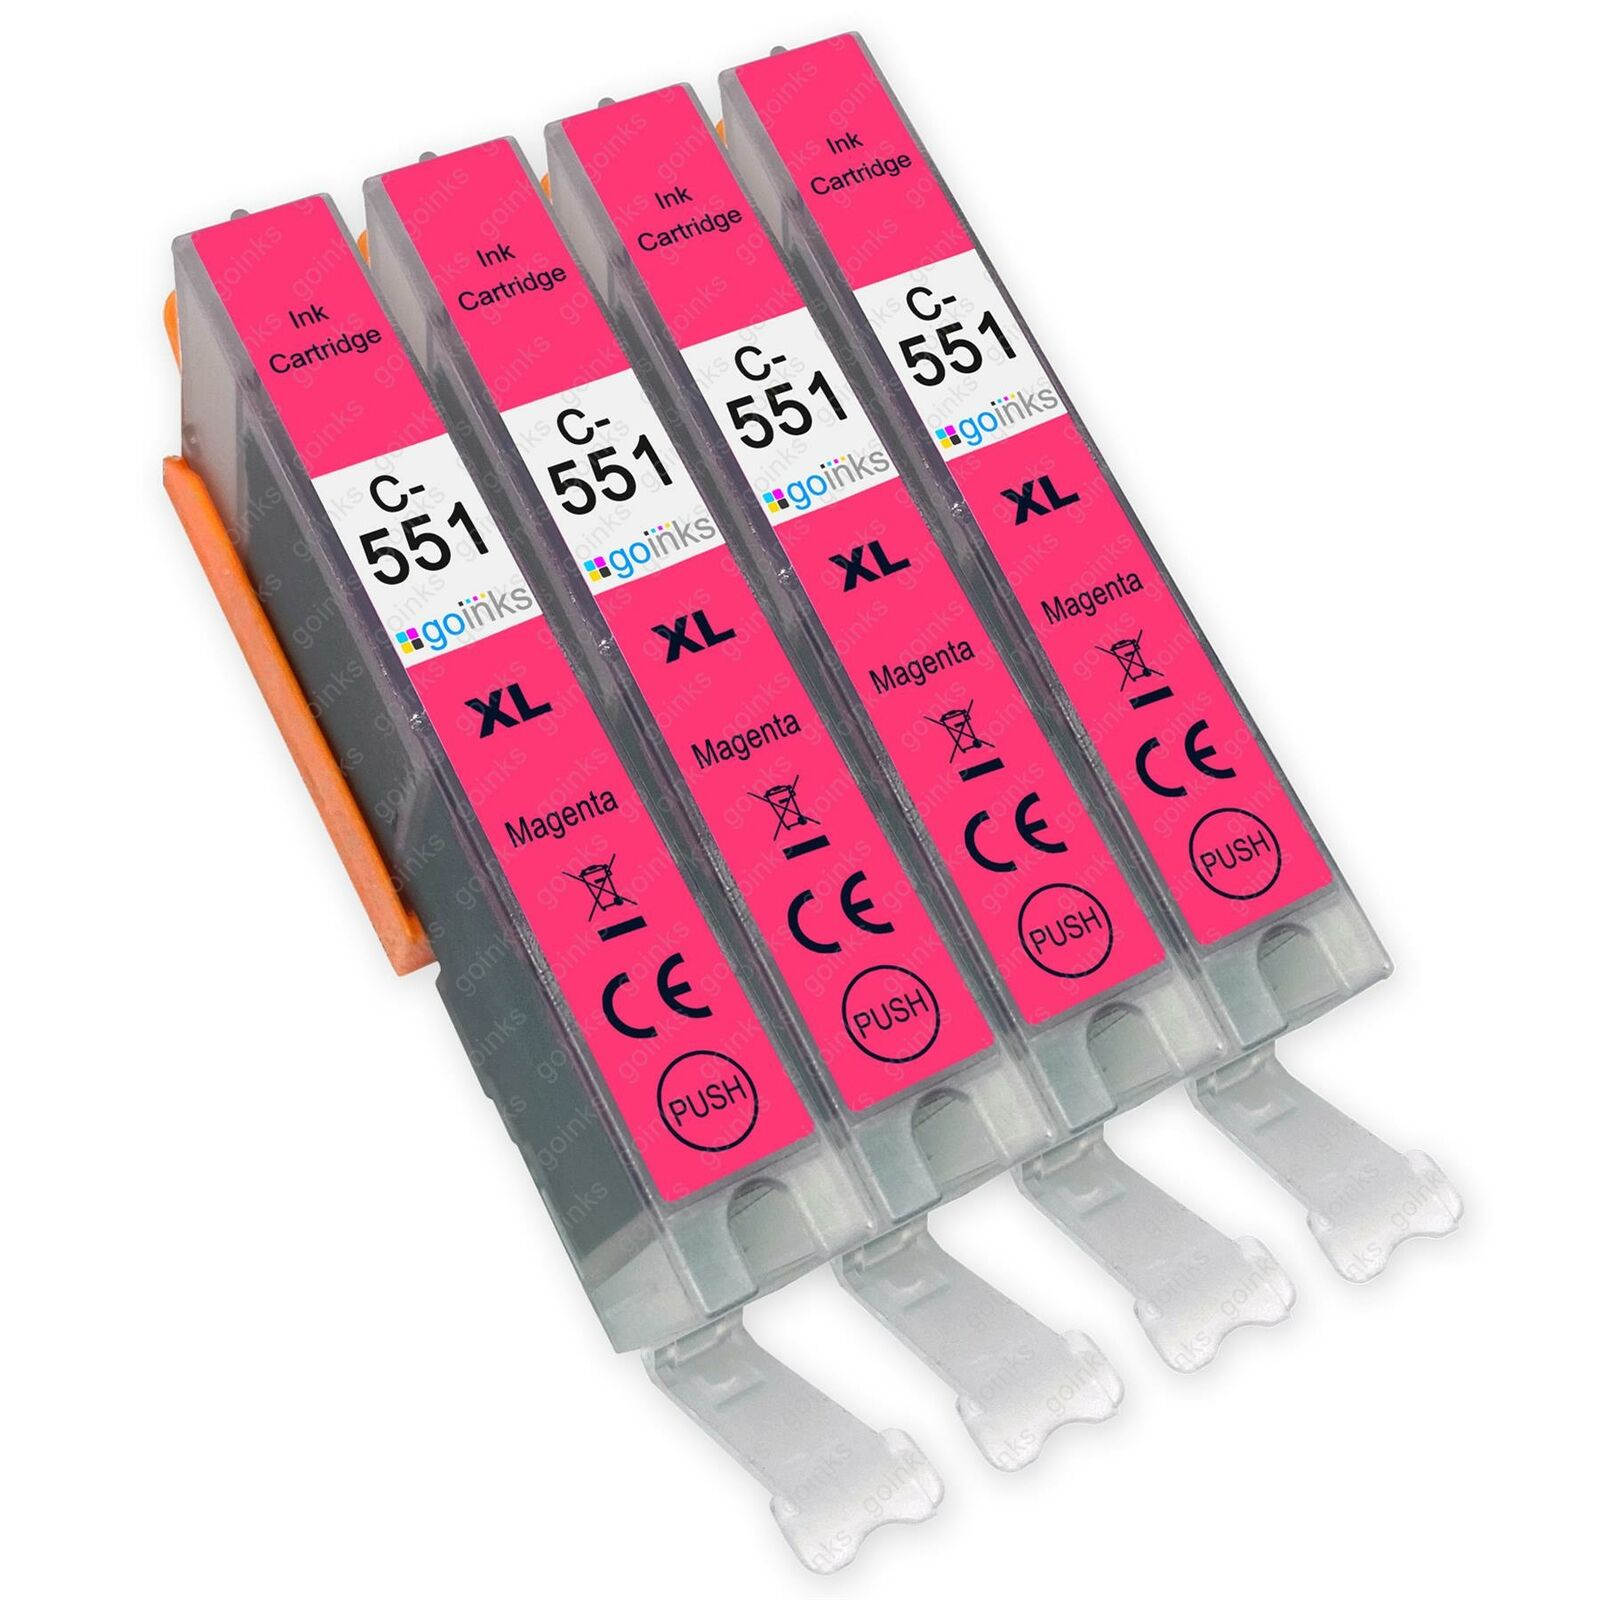 4 Magenta Ink Cartridges for Canon PIXMA iP7250 MG5450 MG6350 MG7150 MX925